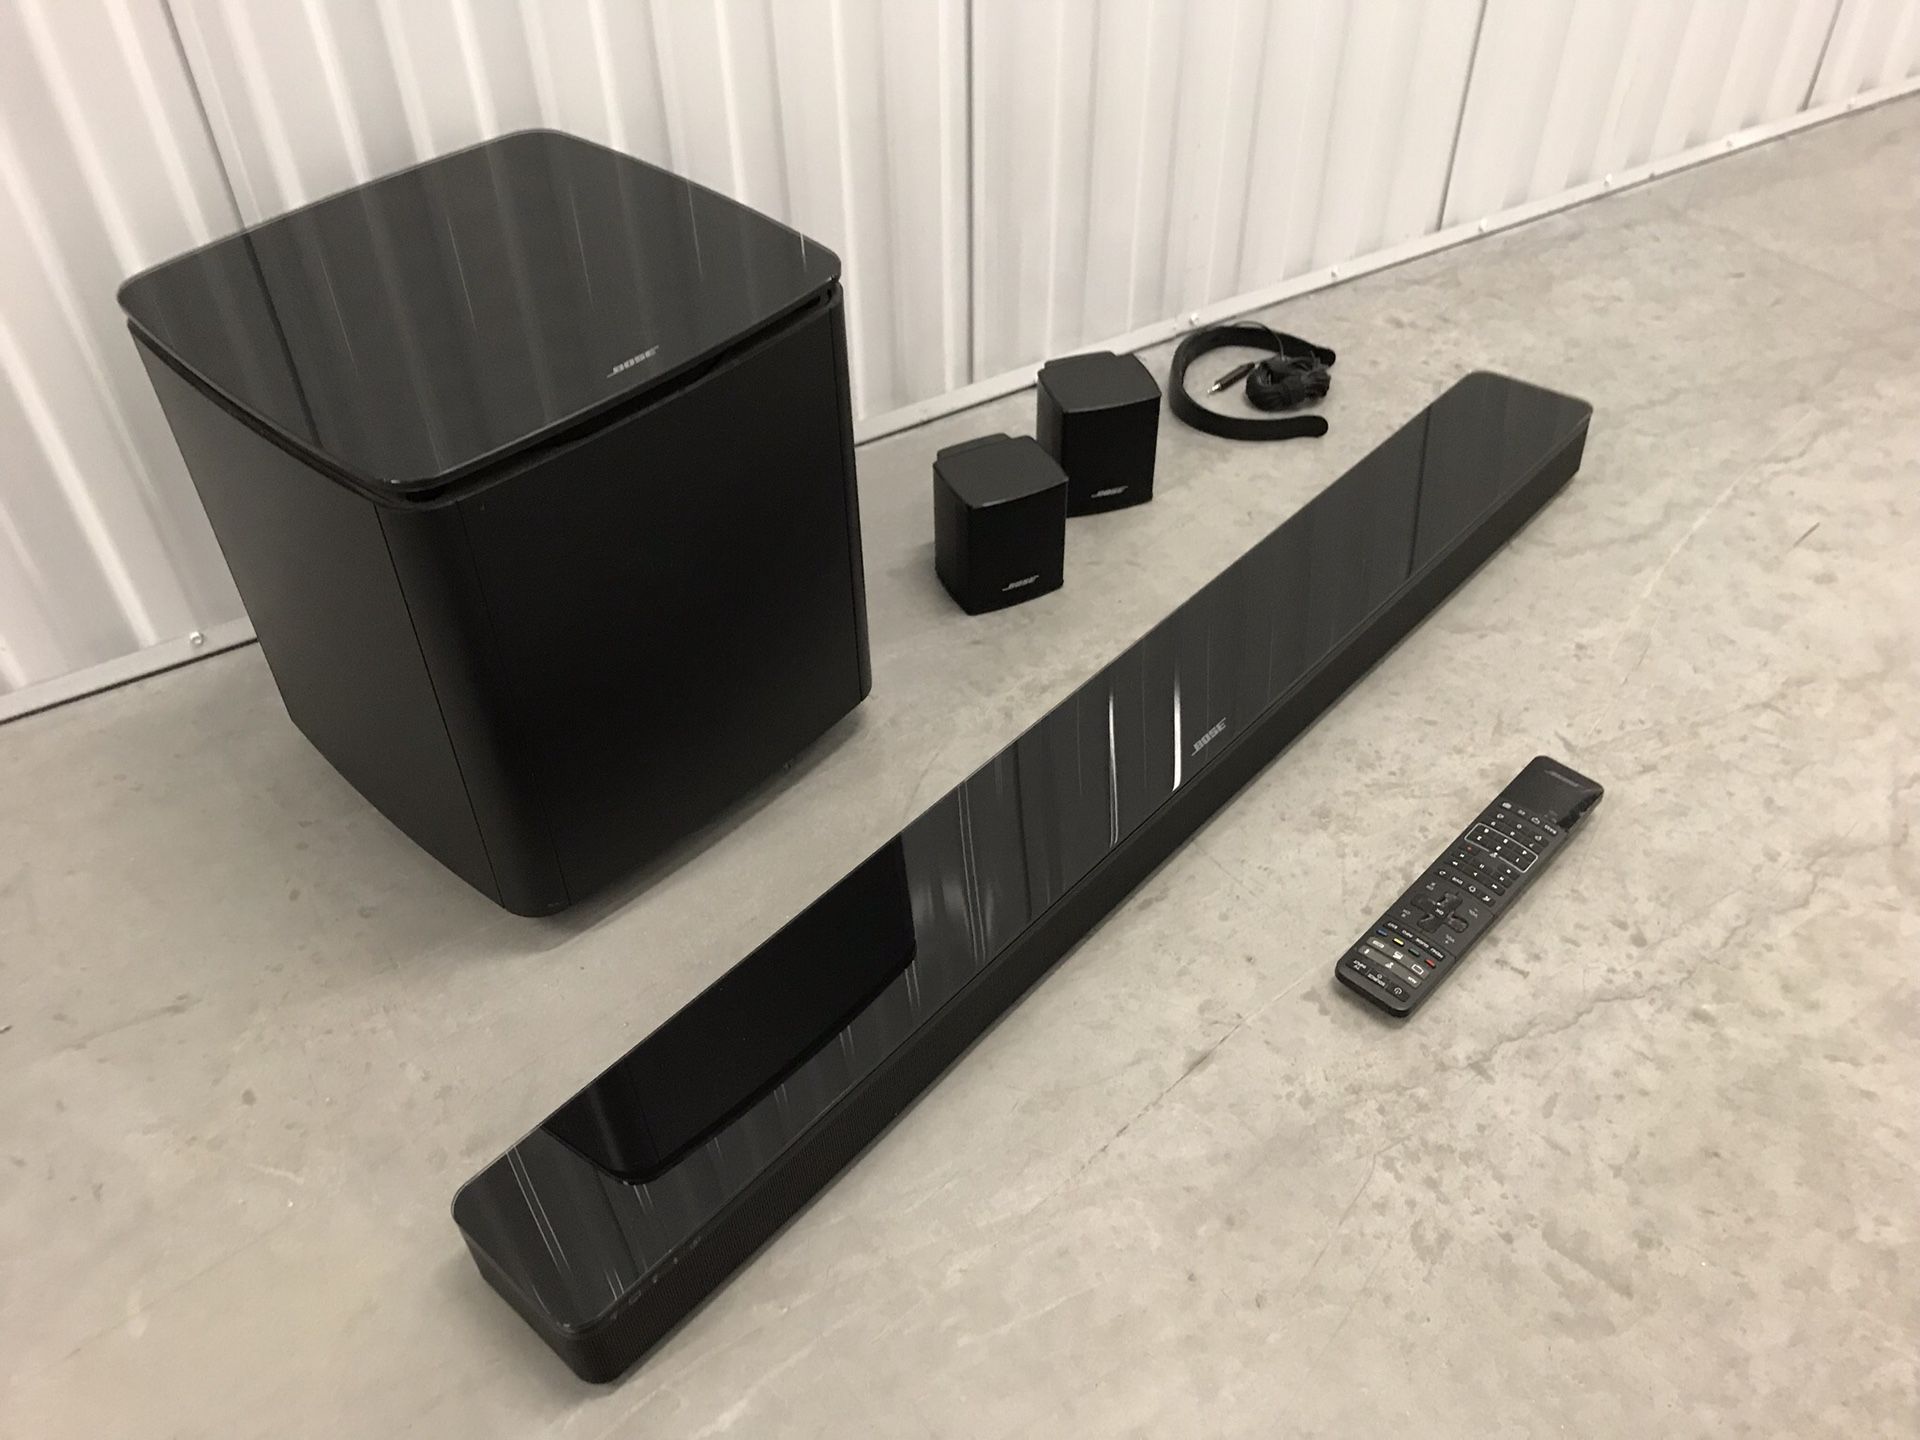 Bose SoundTouch 300 Sound Bar + Bass Module 700 + Surround Speakers